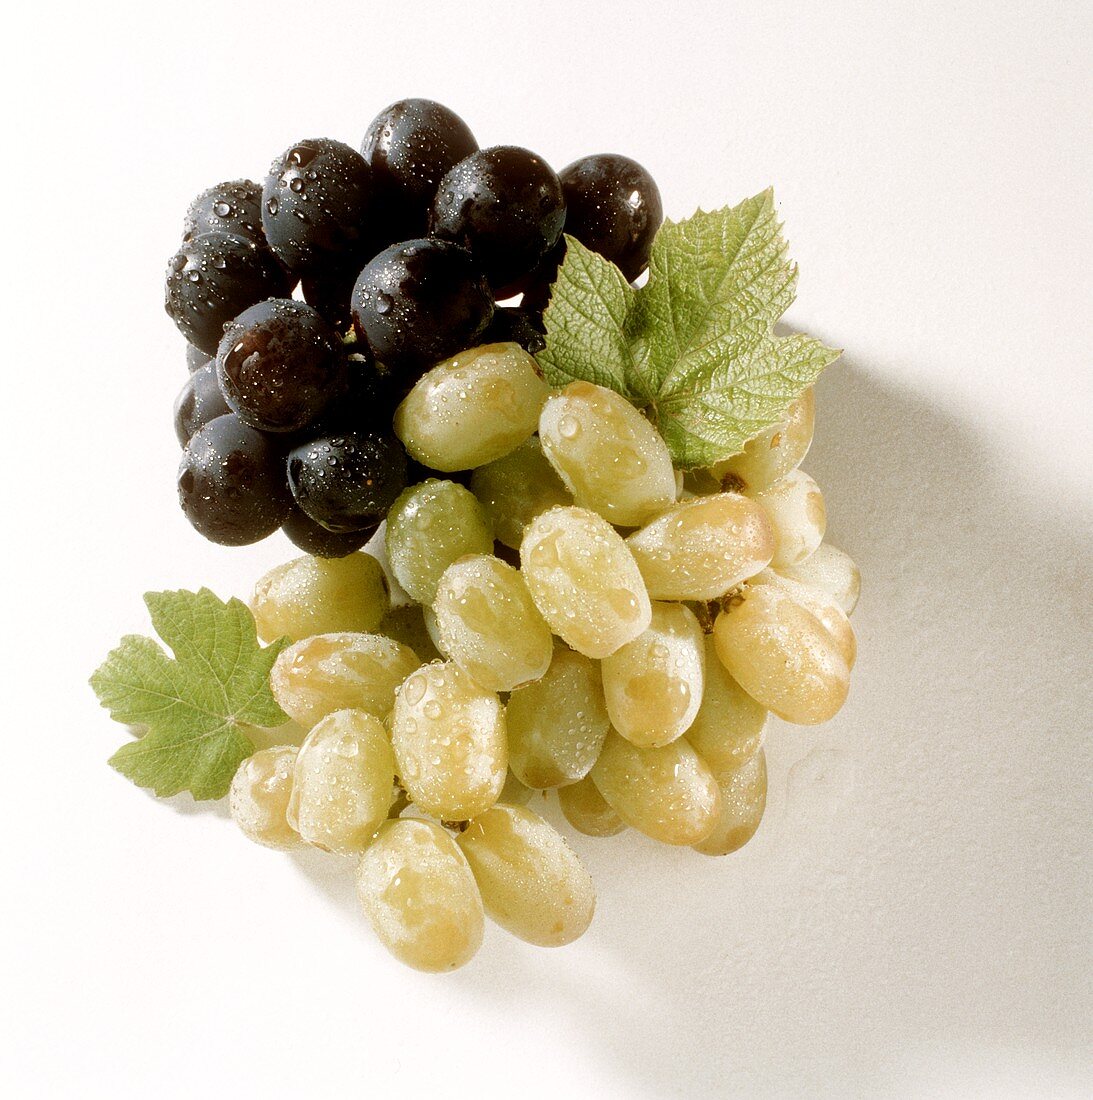 Green and Purple Grapes